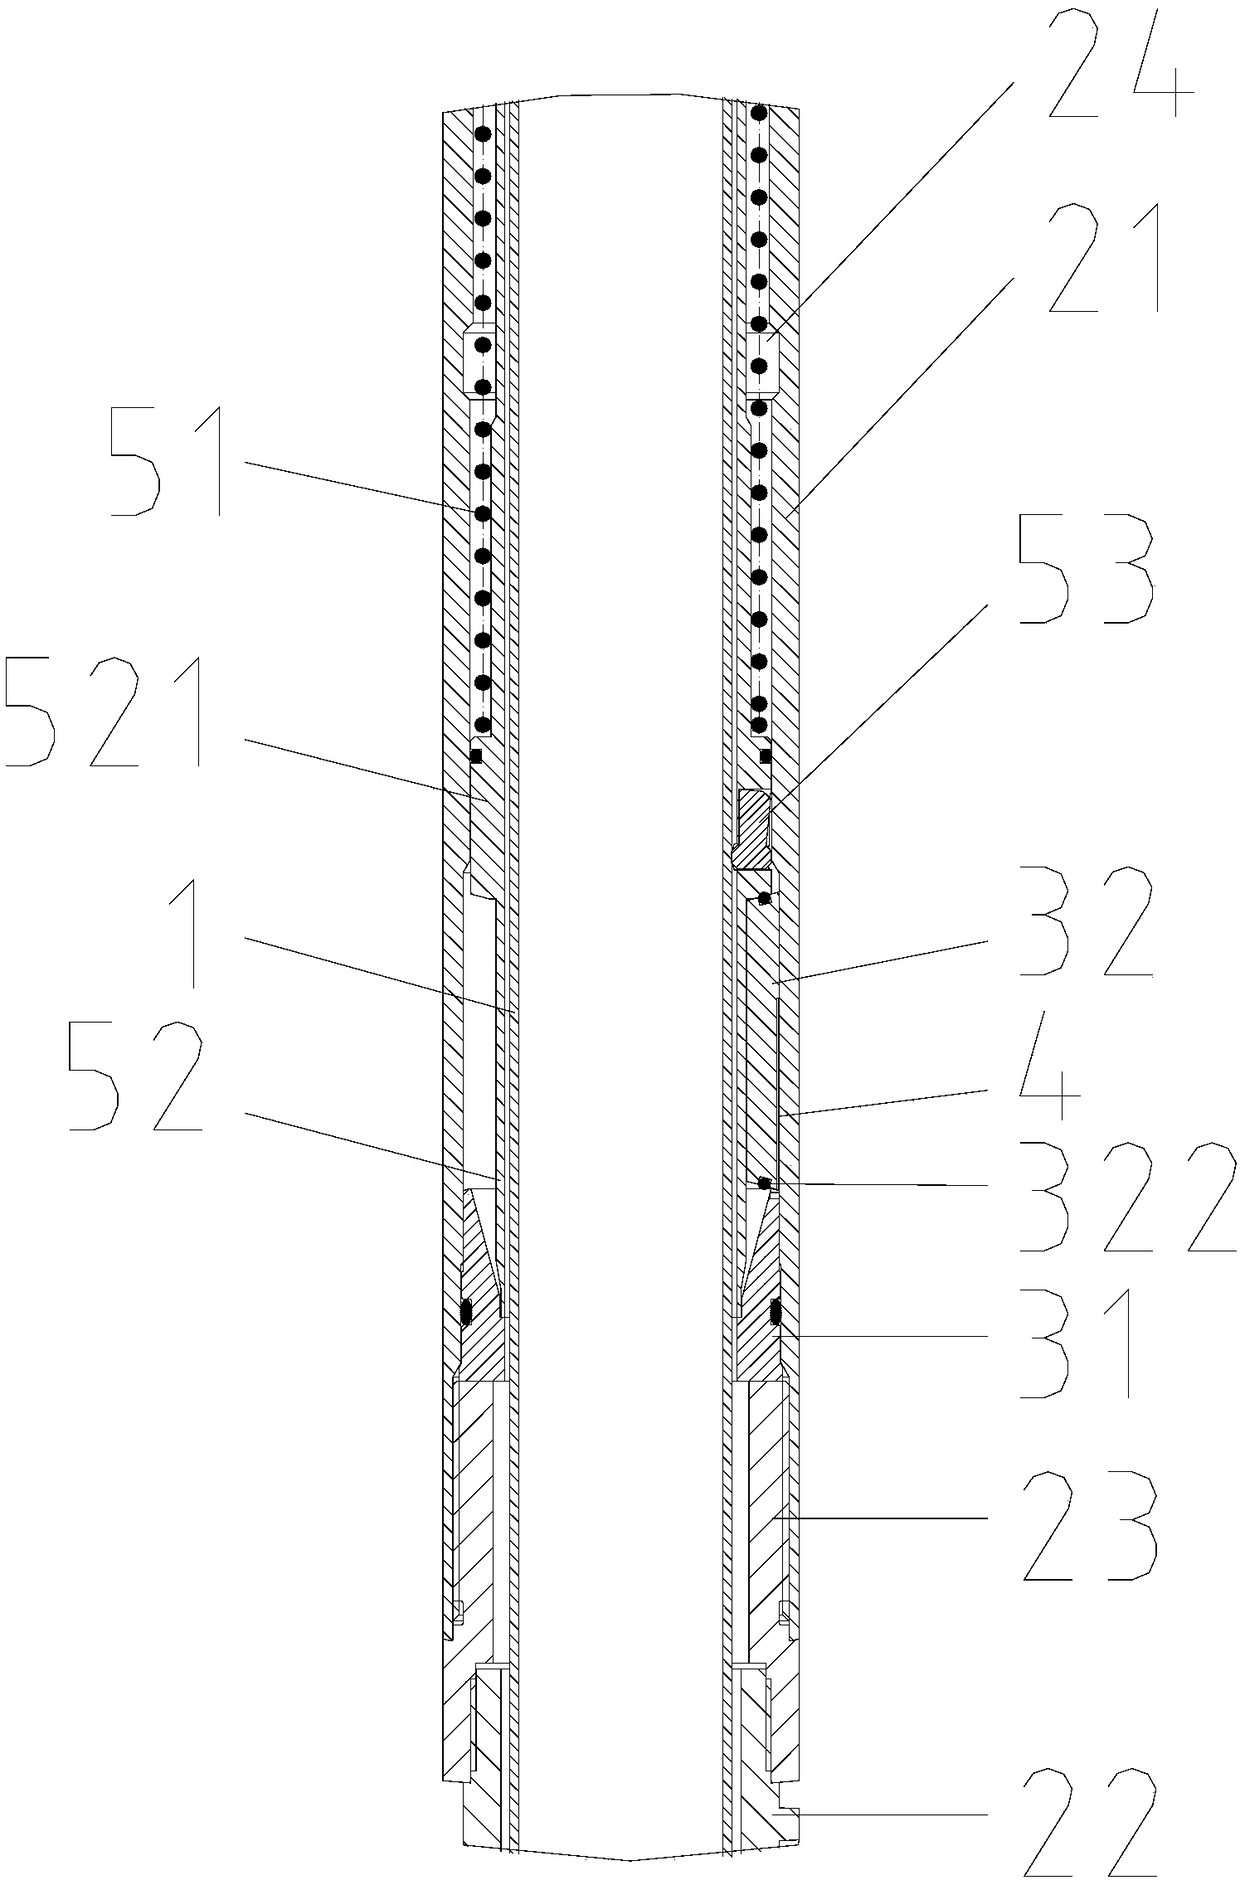 Core barrel sealing structure capable of increasing sealing specific pressure